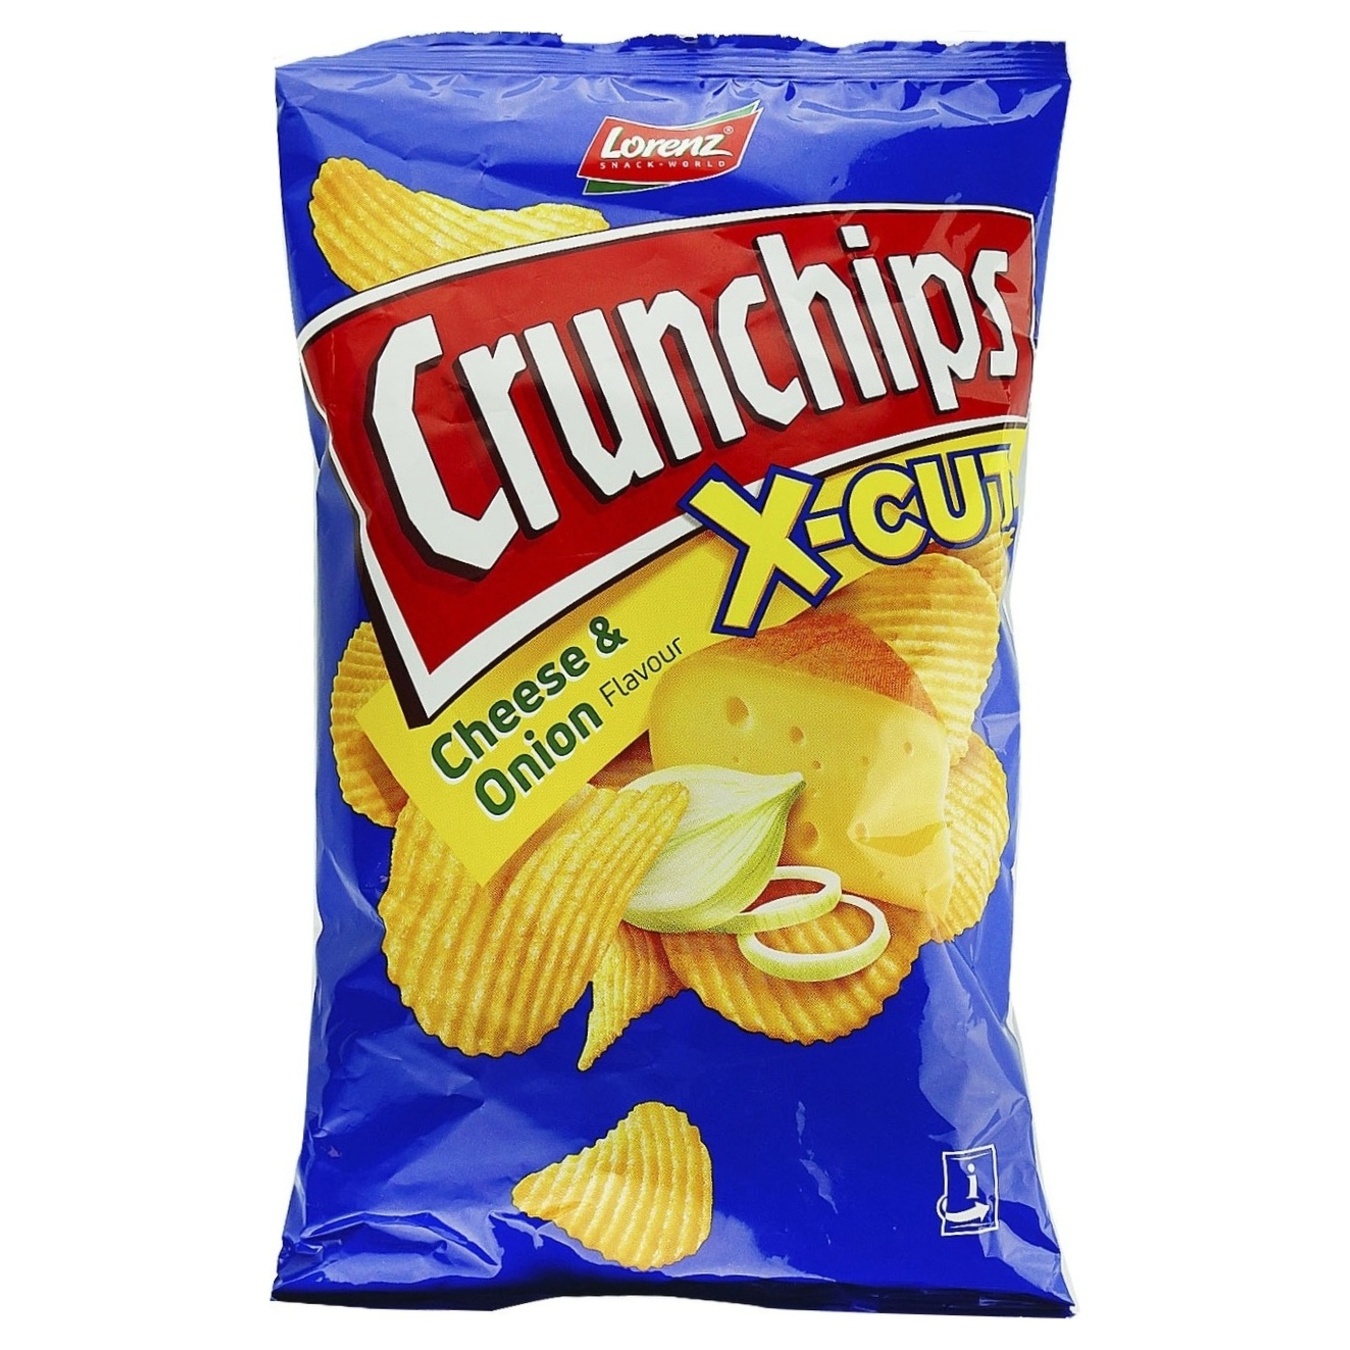 Lorenz x-cut Crunchips potato chips with cheese and onion taste 75g